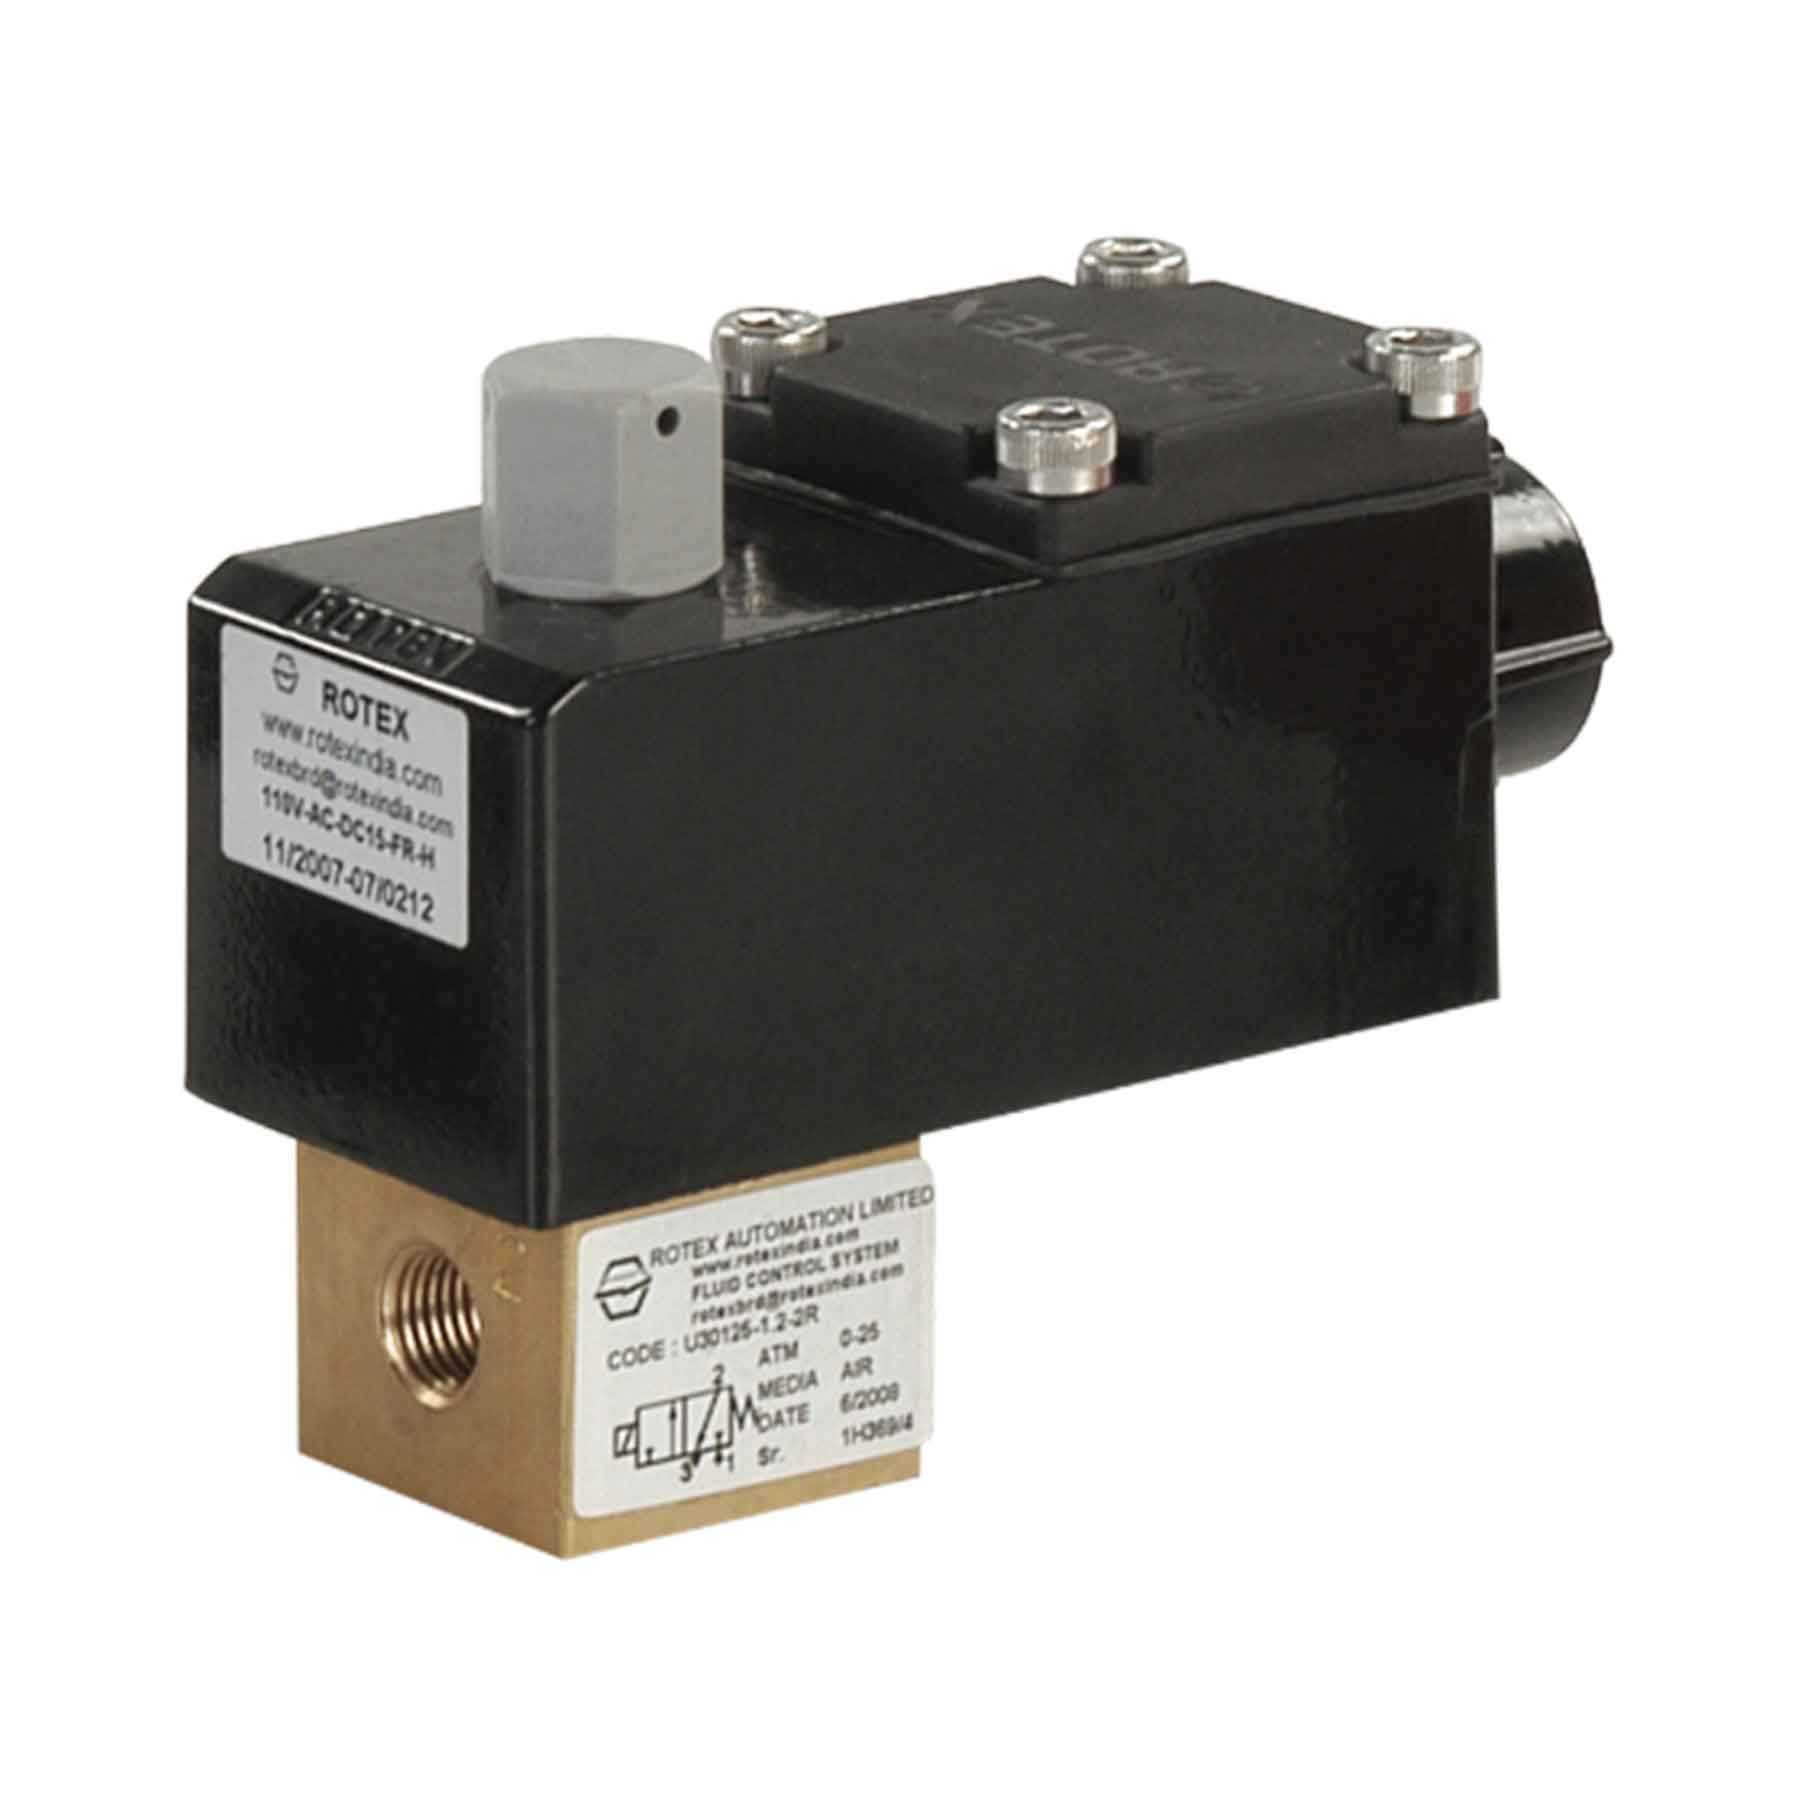 Rotex 2/2-Way Normally Closed Direct Lift Solenoid Valve 20101-4-2G-B2+III-24V-DC-66-NS-H-01